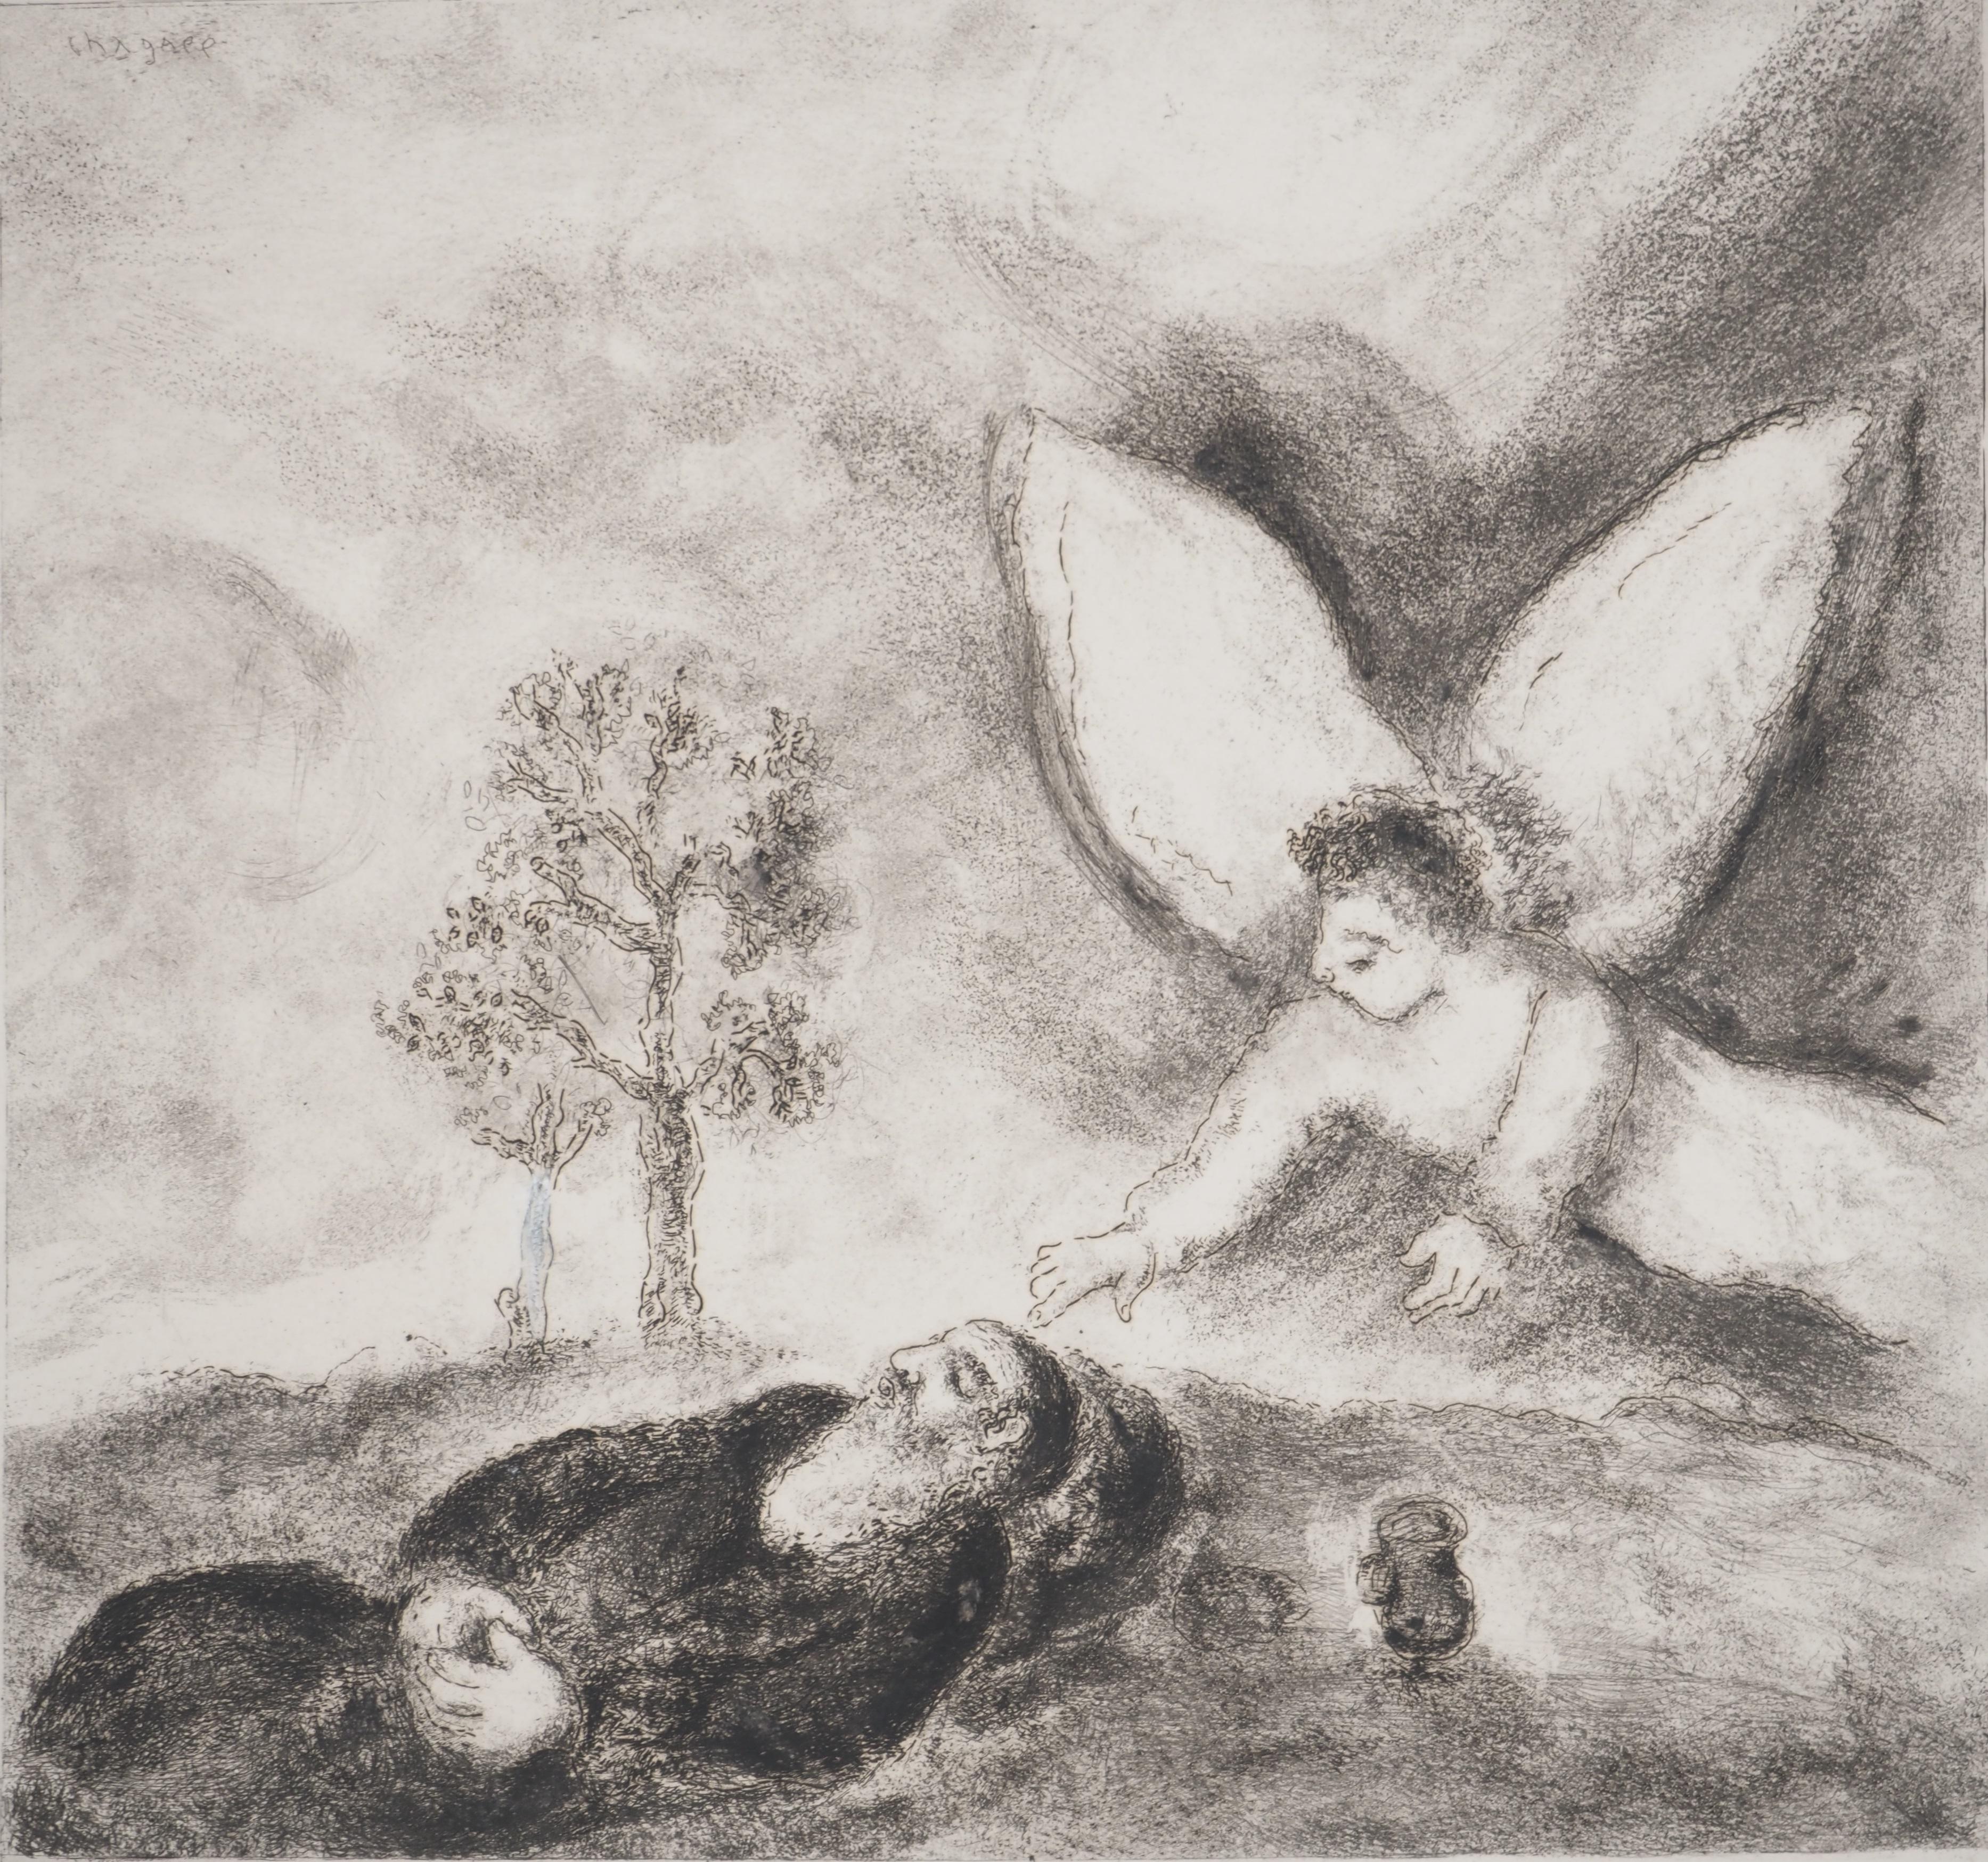 Marc Chagall (1887-1958)
Bible : Elijah touched by an angel, (Elie touché par un ange), 1939

Original etching
Printed signature in the plate
On Montval vellum, 33.5 x 44 cm (c. 13.1 x 17.3 inch)

INFORMATION: Published by Vollard / Tériade in